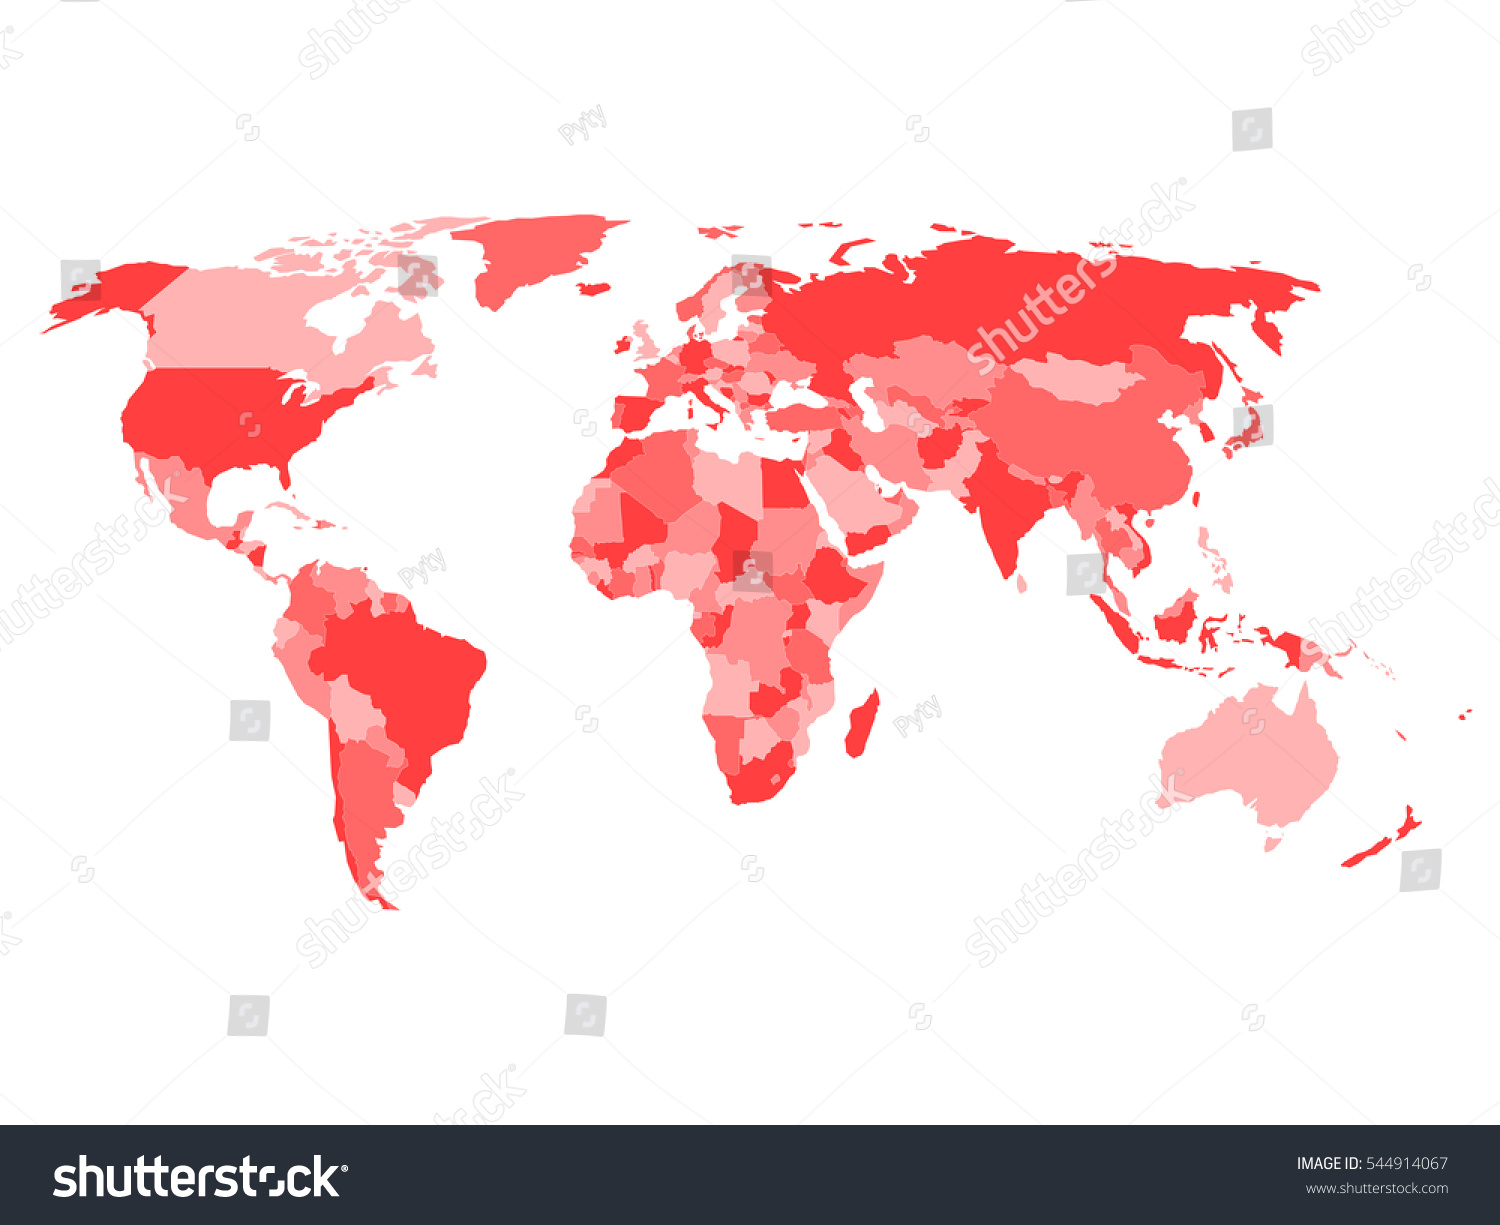 World map with names of sovereign countries and larger dependent territories. Simplified vector map in four shades of red on white background. #544914067